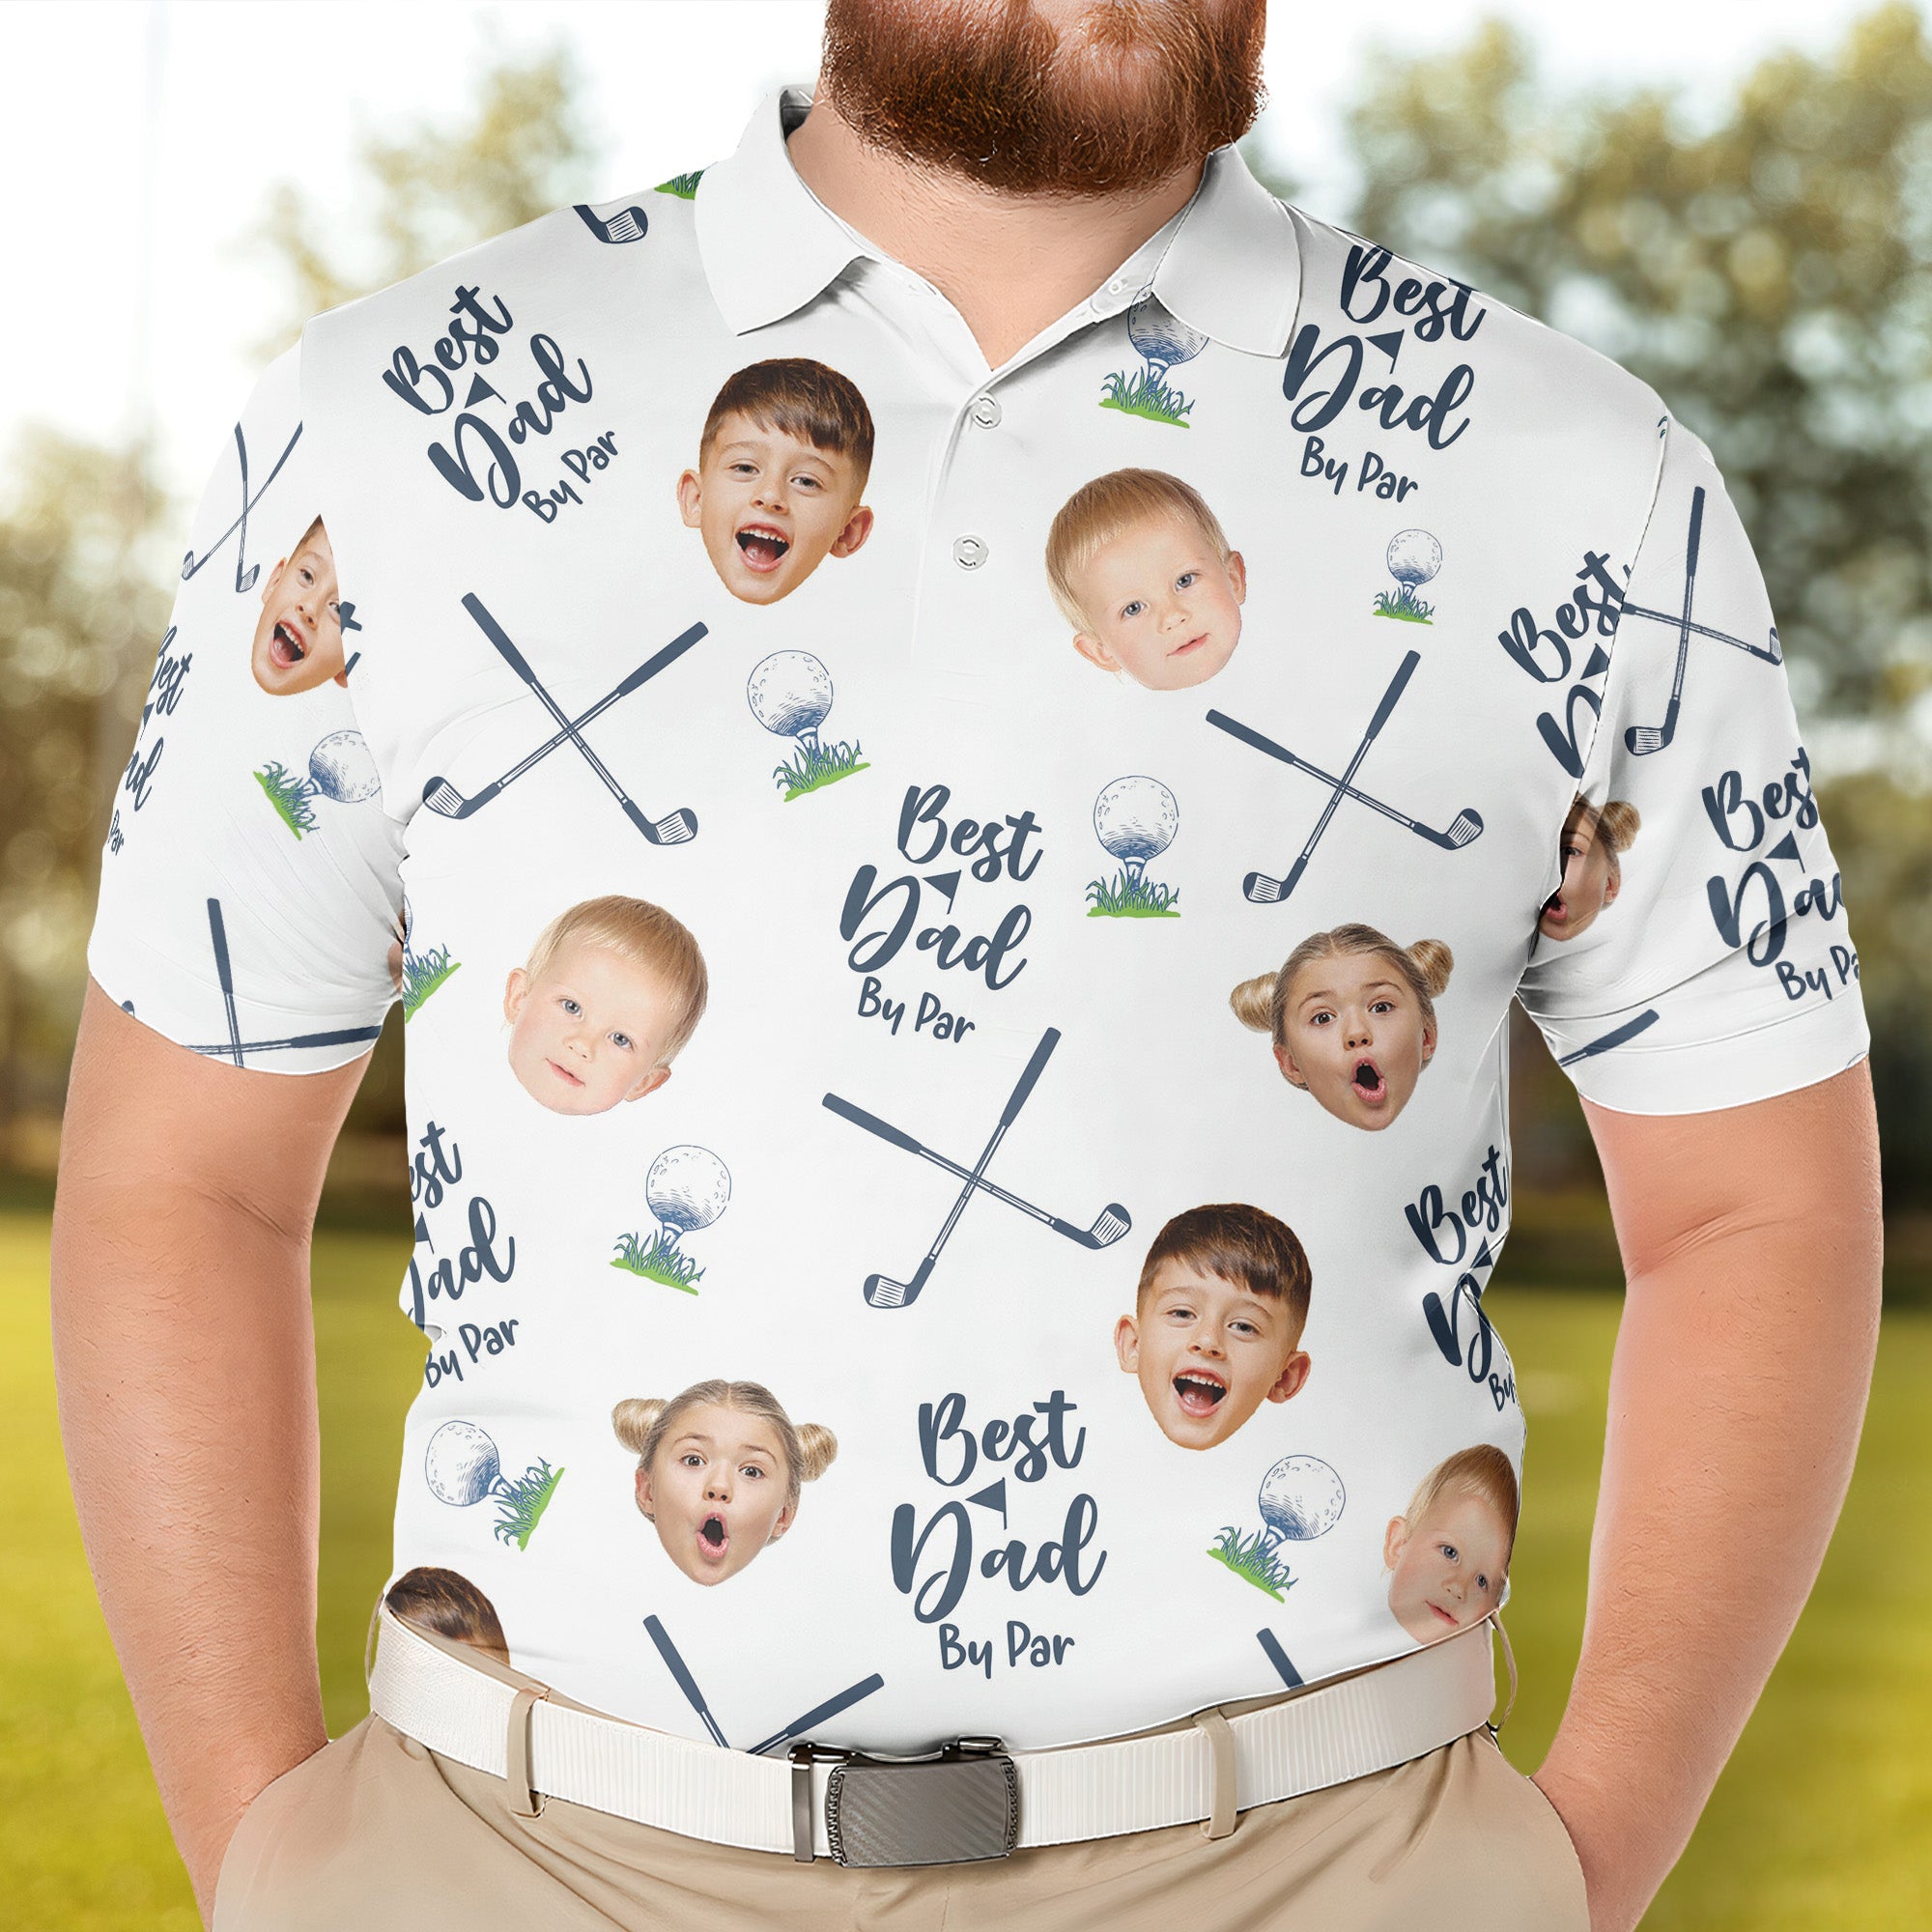 Best Dad By Par - Personalized Photo Polo Shirt